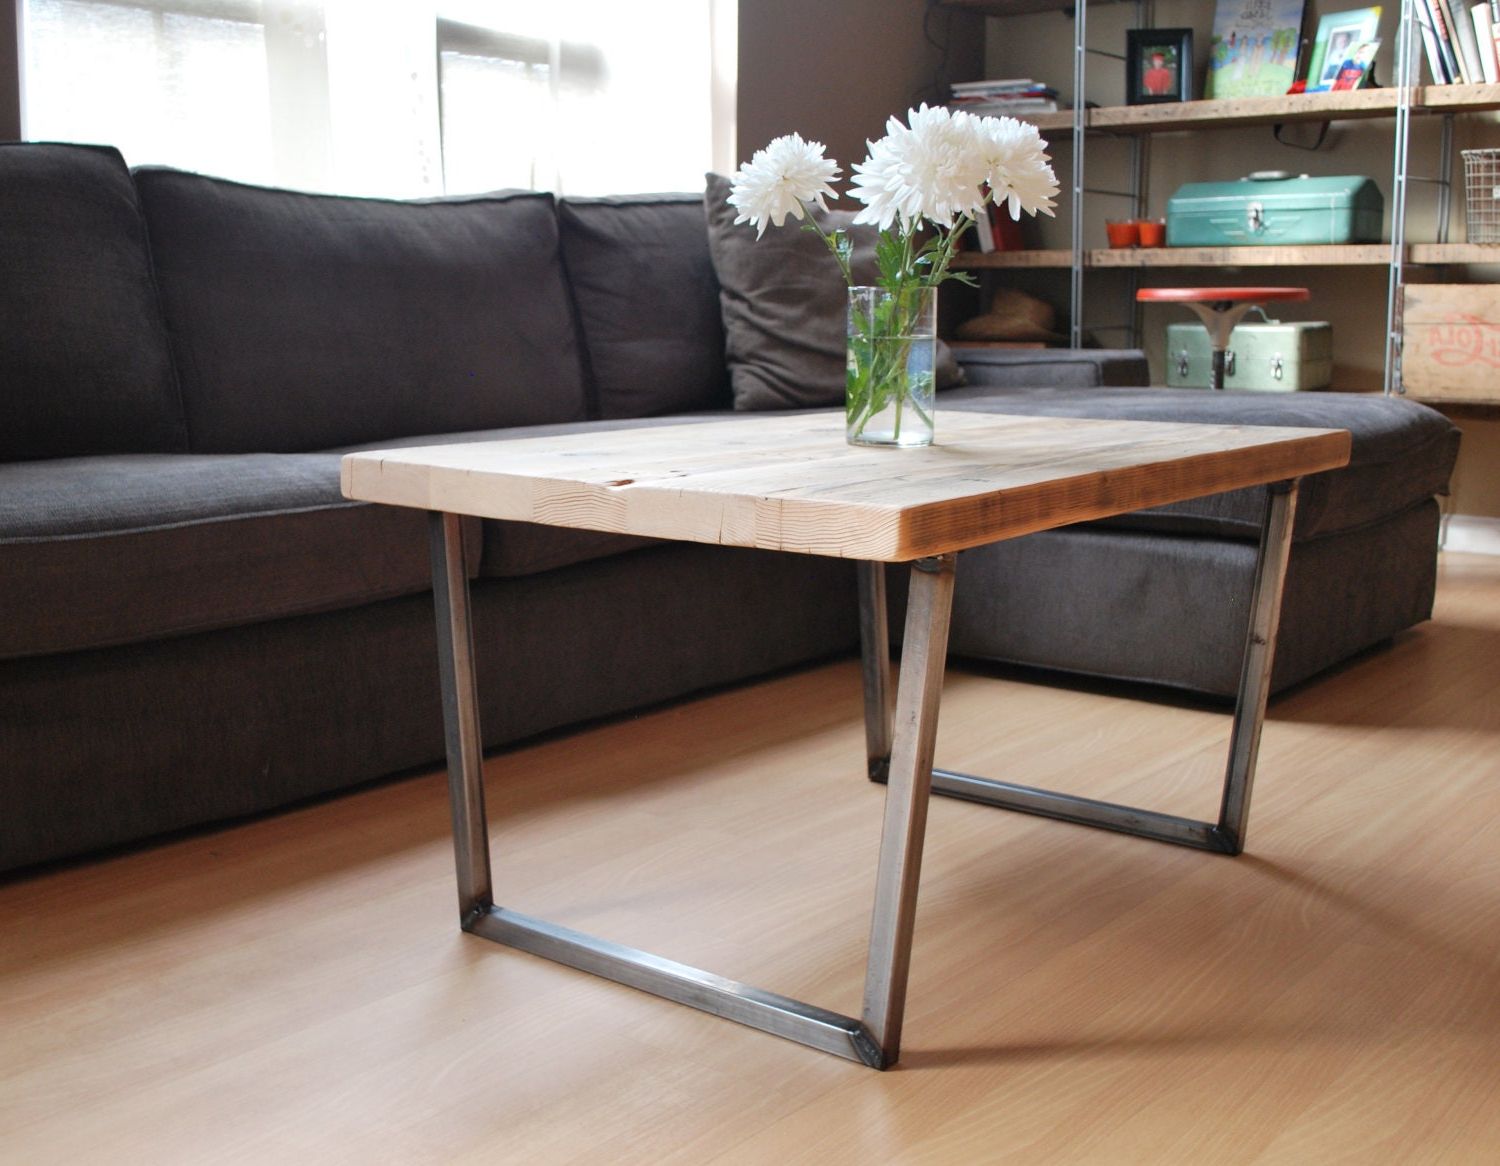 Fashionable Wood Coffee Table With Square Steel Legs Made Of Intended For Oak Wood And Metal Legs Coffee Tables (View 3 of 20)